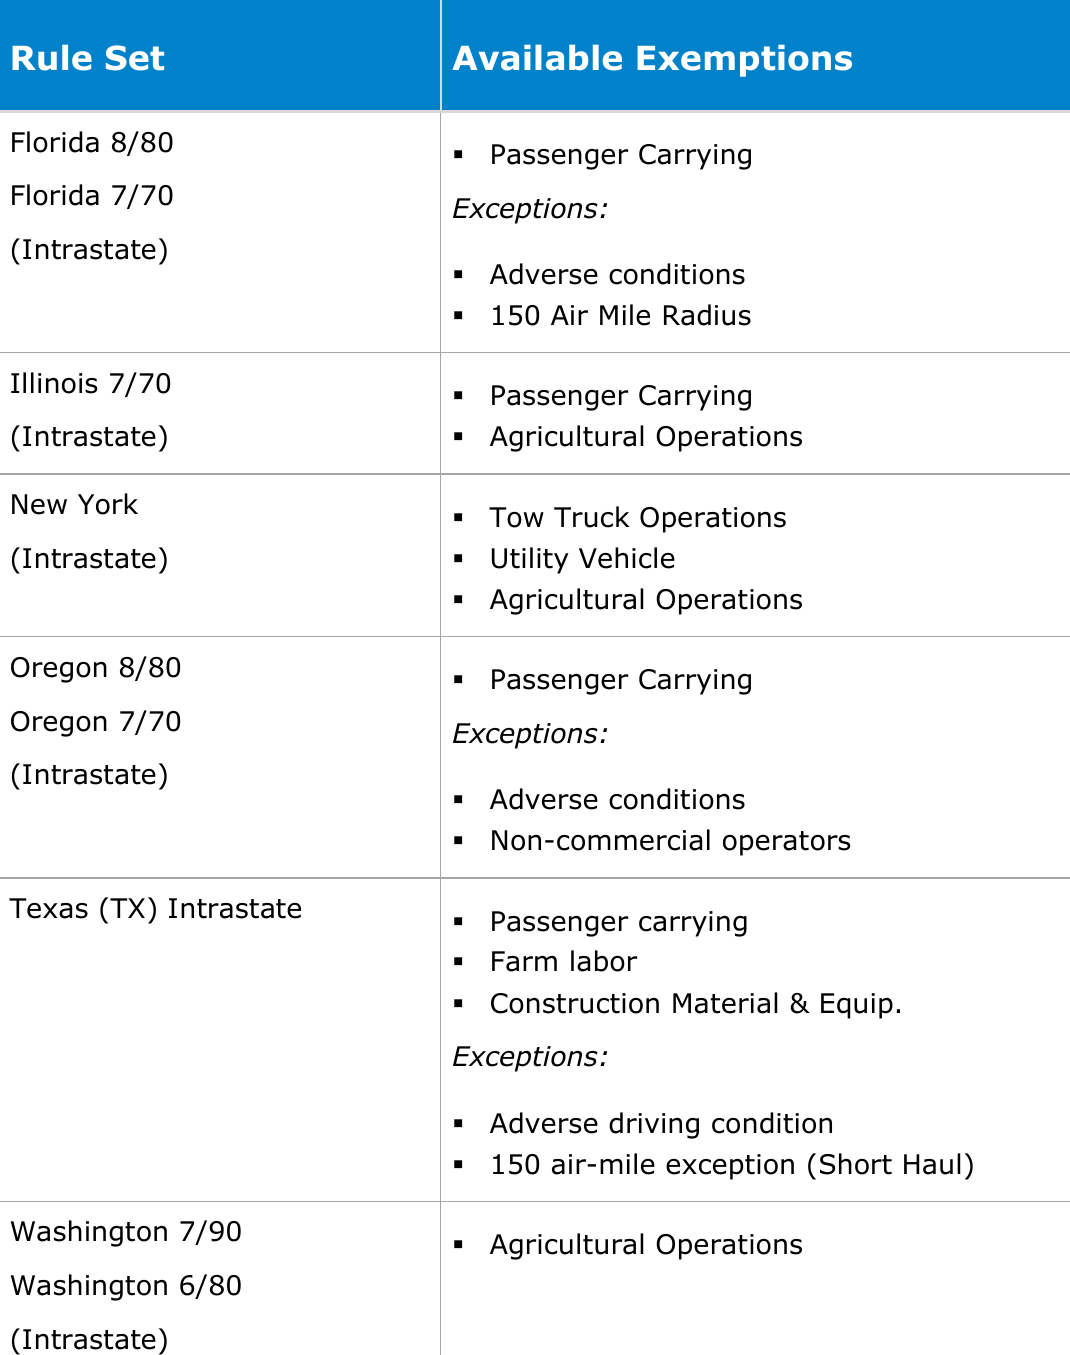 Change My Settings DriverConnect User Guide  84 © 2016-2017, Rand McNally, Inc. Rule Set Available Exemptions Florida 8/80  Florida 7/70 (Intrastate)  Passenger Carrying Exceptions:  Adverse conditions  150 Air Mile Radius Illinois 7/70 (Intrastate)  Passenger Carrying  Agricultural Operations New York (Intrastate)  Tow Truck Operations  Utility Vehicle  Agricultural Operations Oregon 8/80  Oregon 7/70 (Intrastate)  Passenger Carrying Exceptions:  Adverse conditions   Non-commercial operators Texas (TX) Intrastate  Passenger carrying  Farm labor  Construction Material &amp; Equip. Exceptions:  Adverse driving condition  150 air-mile exception (Short Haul) Washington 7/90 Washington 6/80 (Intrastate)  Agricultural Operations 